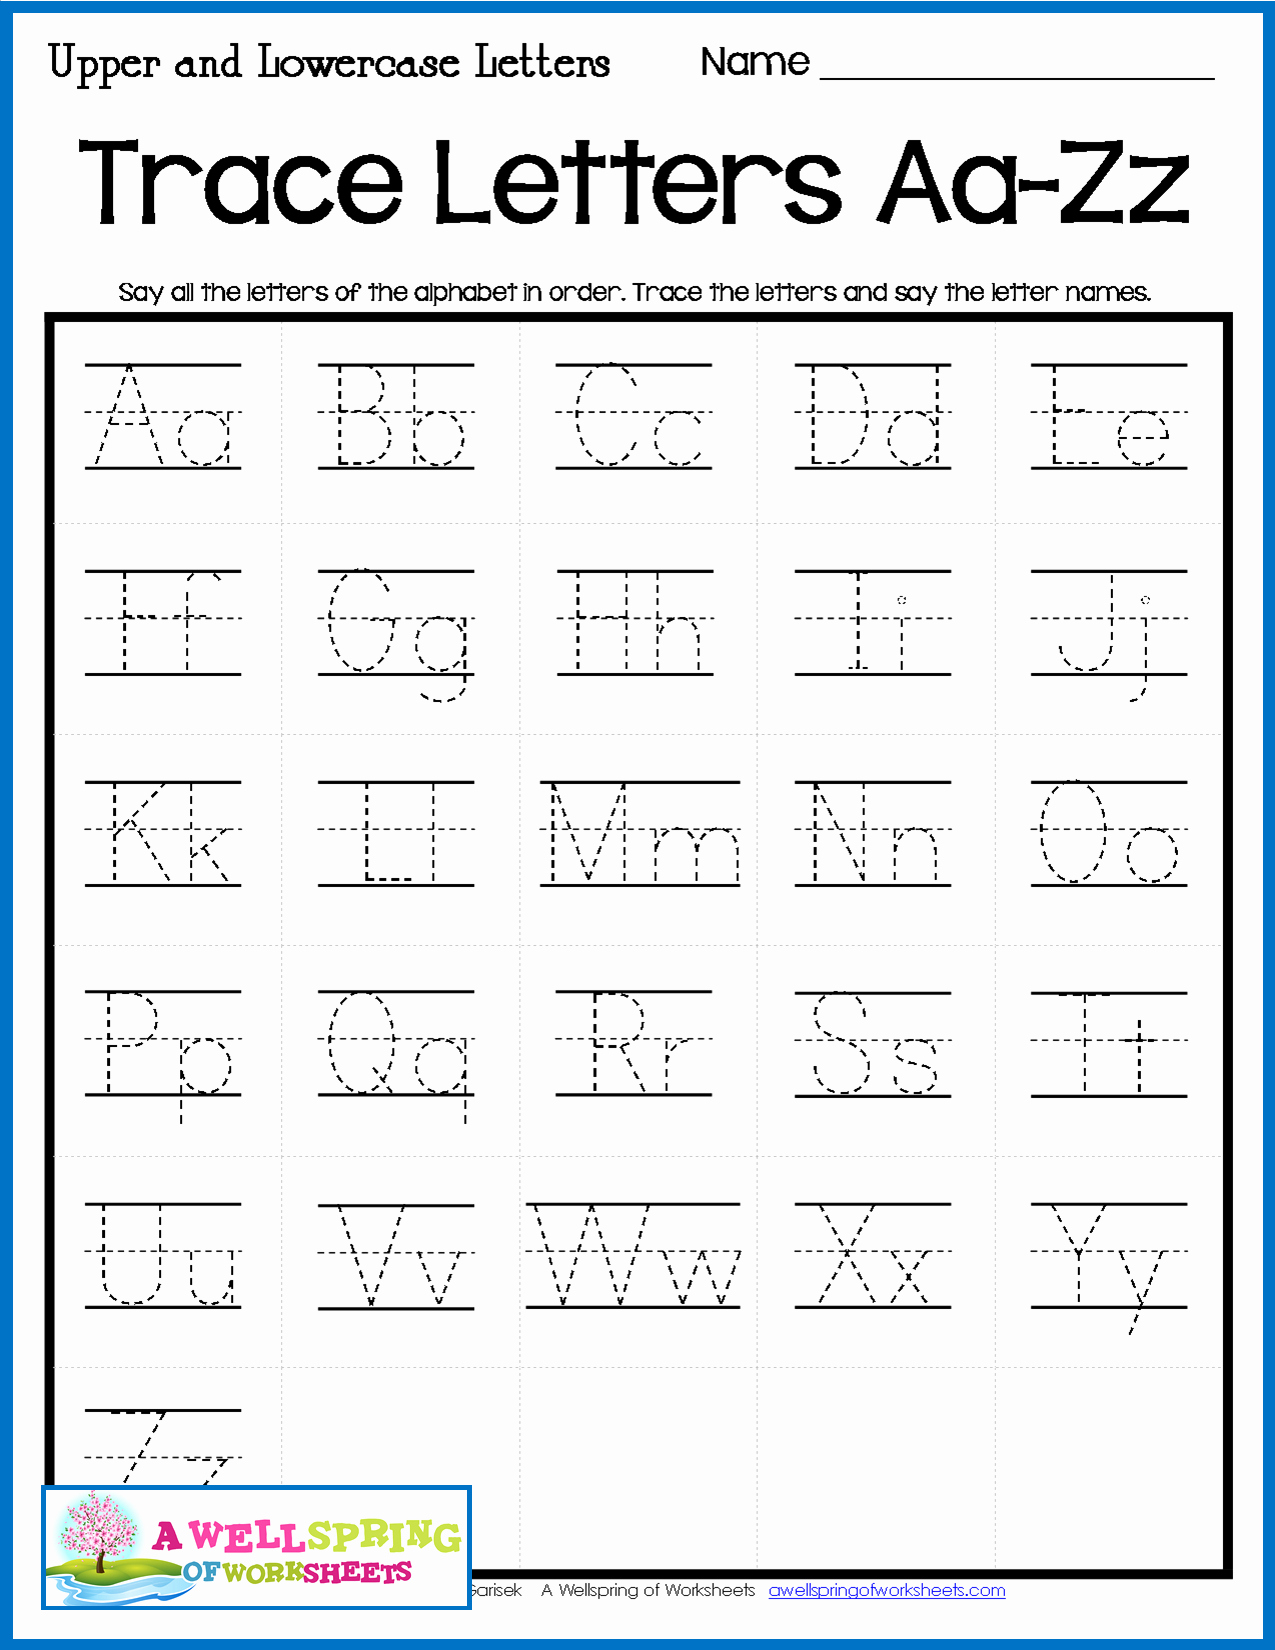 Lowercase Alphabet Tracing Worksheets Luxury Tracing Lowercase Letters for Preschool